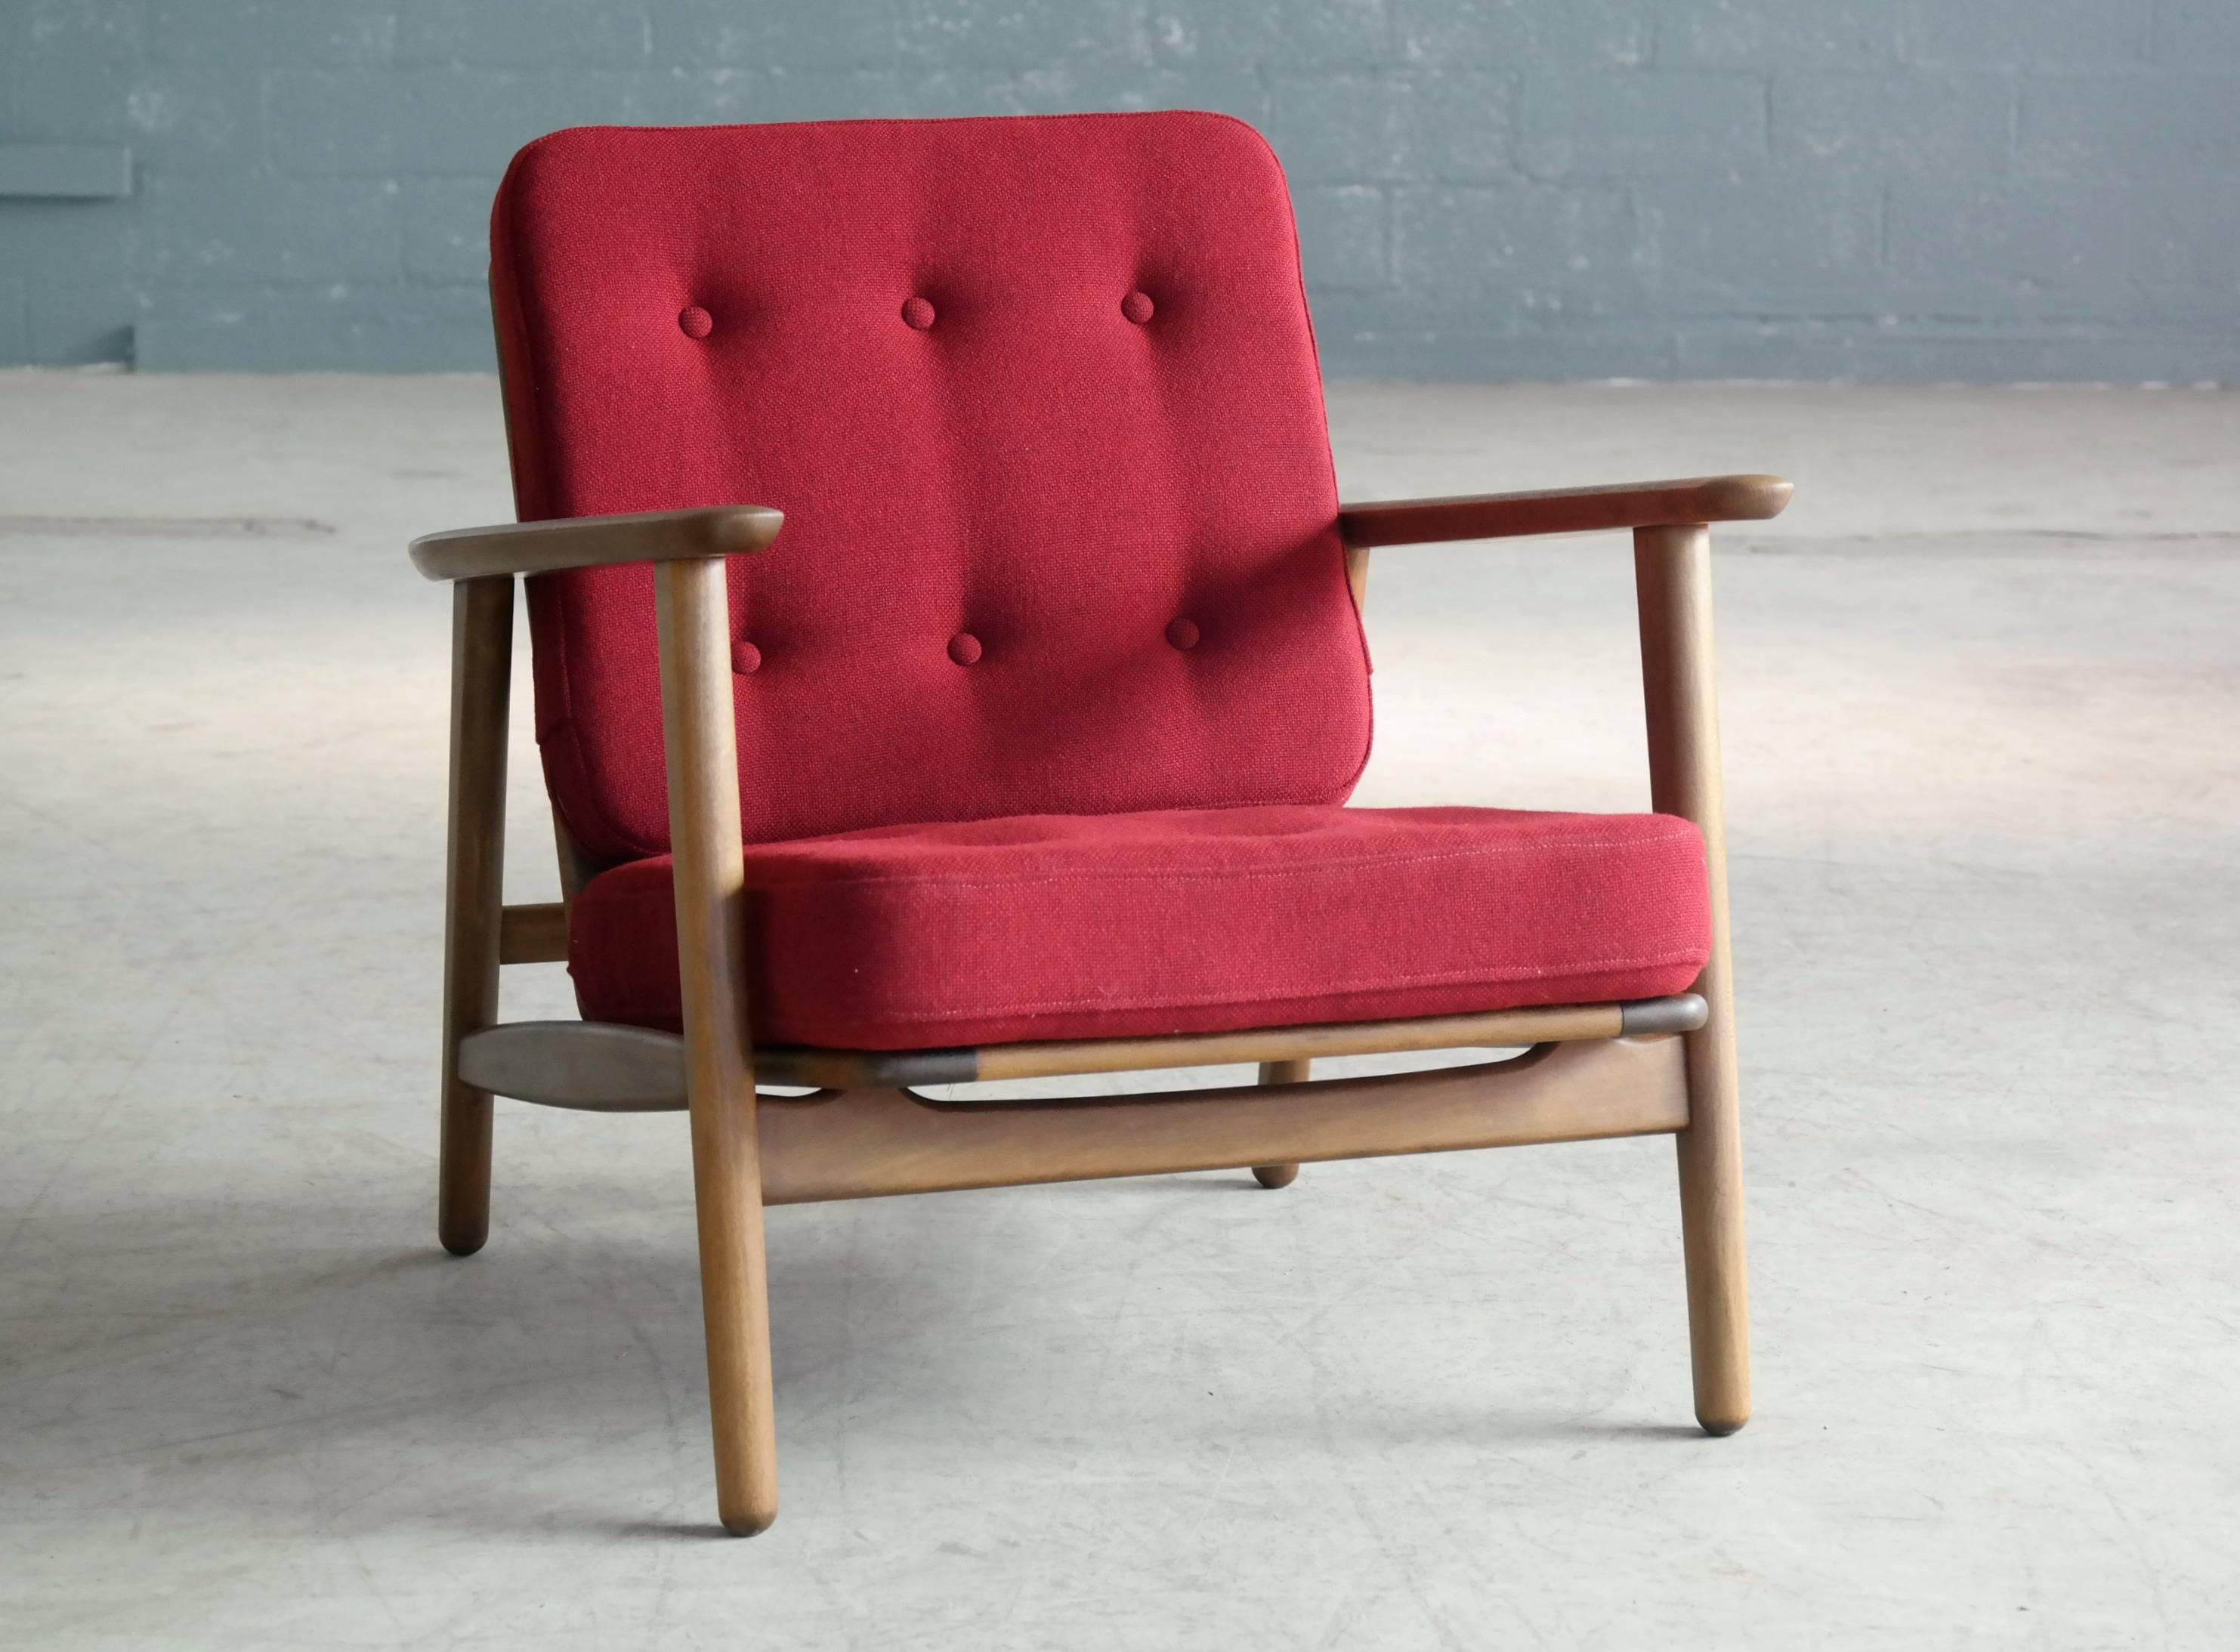 Classic and rare easy chair in beechwood designed by Hans Wegner for GETAMA, Denmark as Model GE-233. The GE-233 was one of the first designs Wegner made for GETAMA, circa 1952 and was made just before teak started to become the material of choice